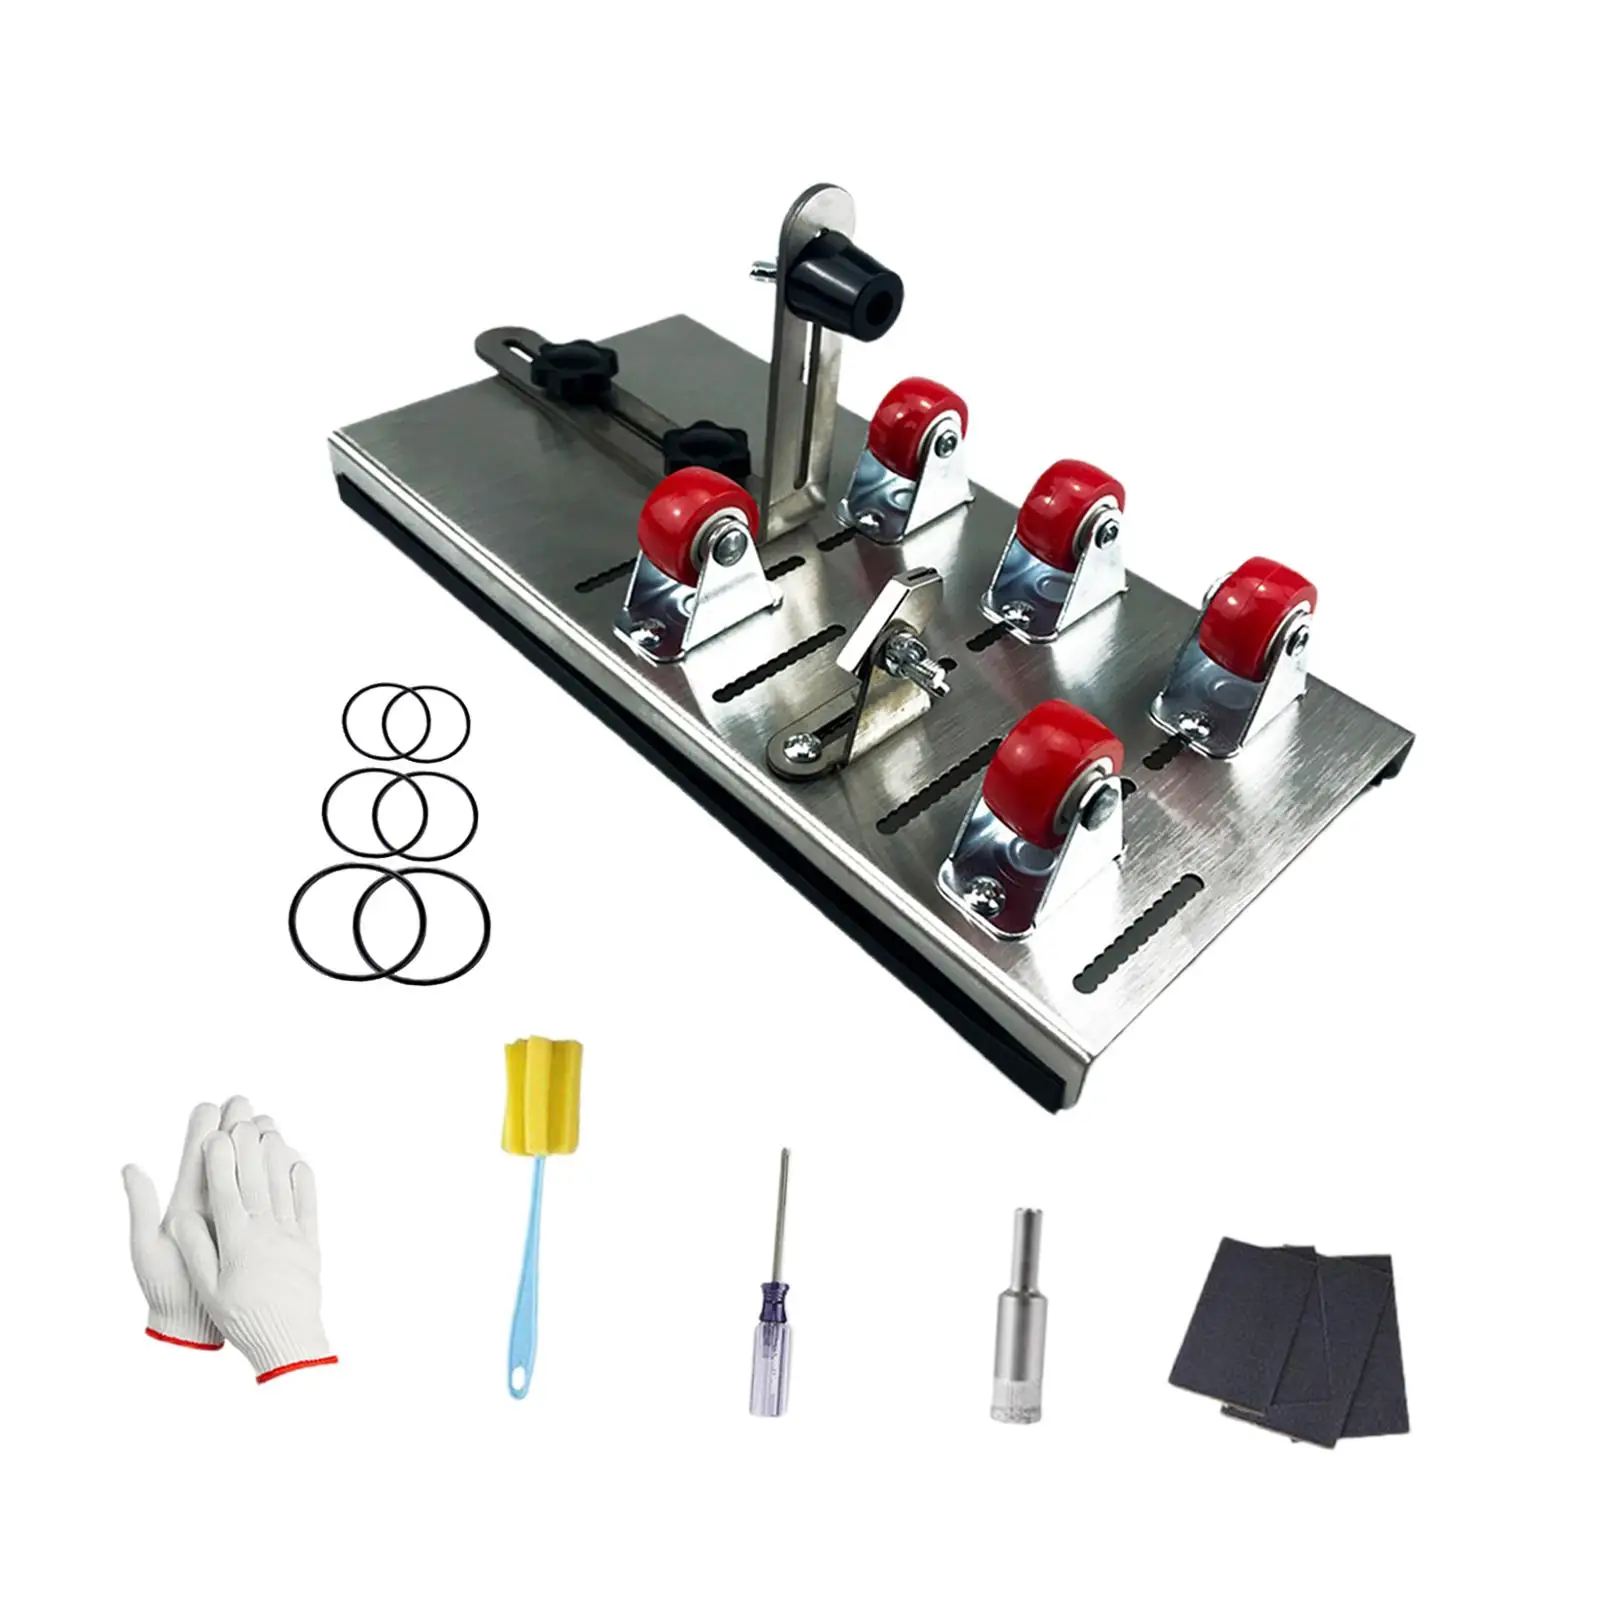 Glass Bottle Cutter Set Stainless Steel Making Candlesticks Vases Glass Cutting Tool for Cutting Wine Liquor Champagne Beer